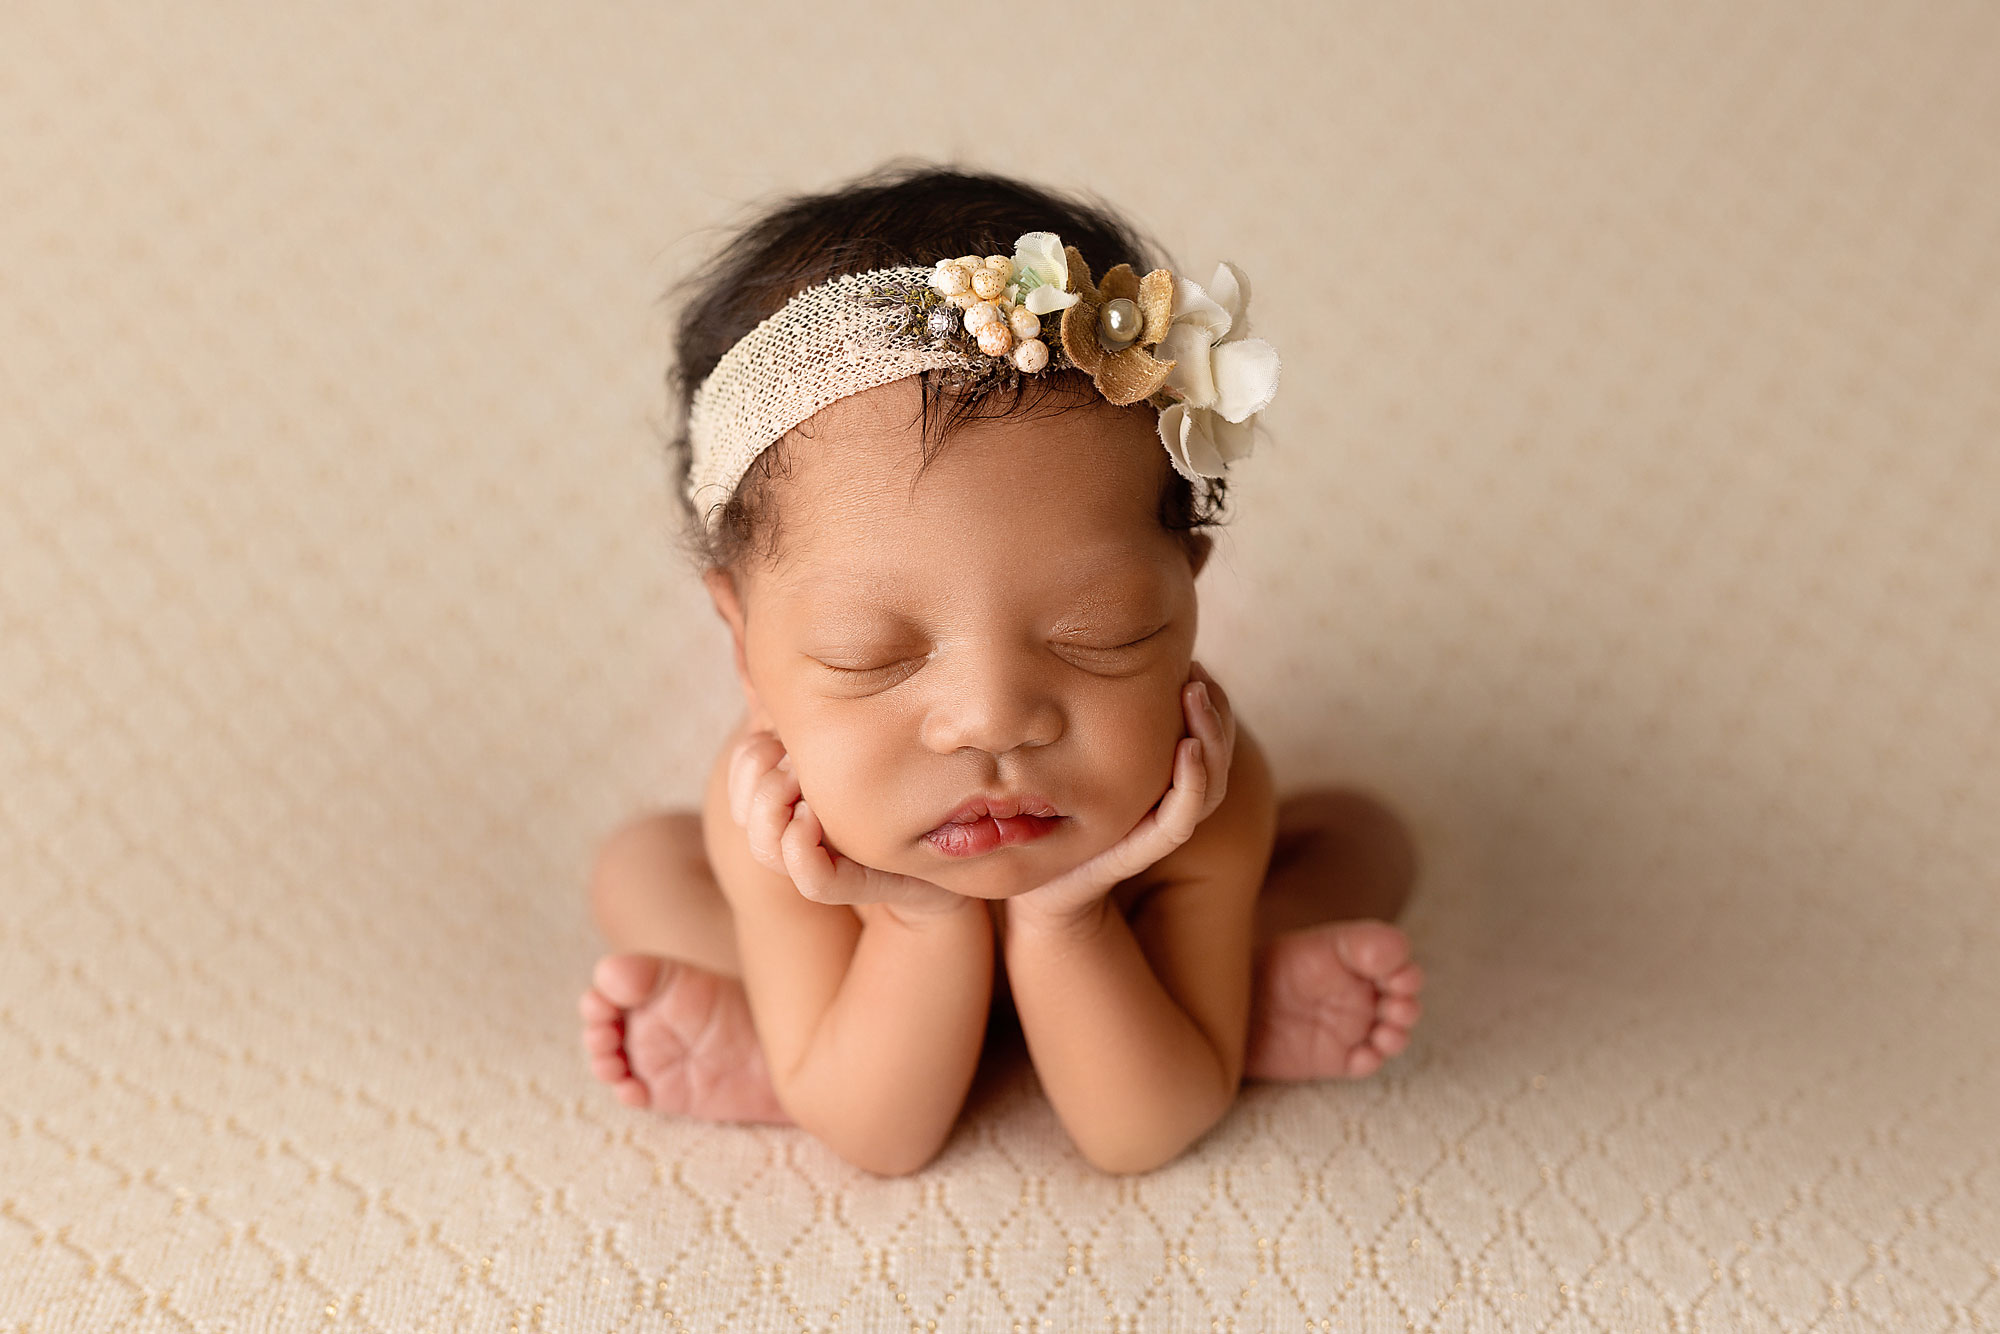 newborn baby in a froggy pose